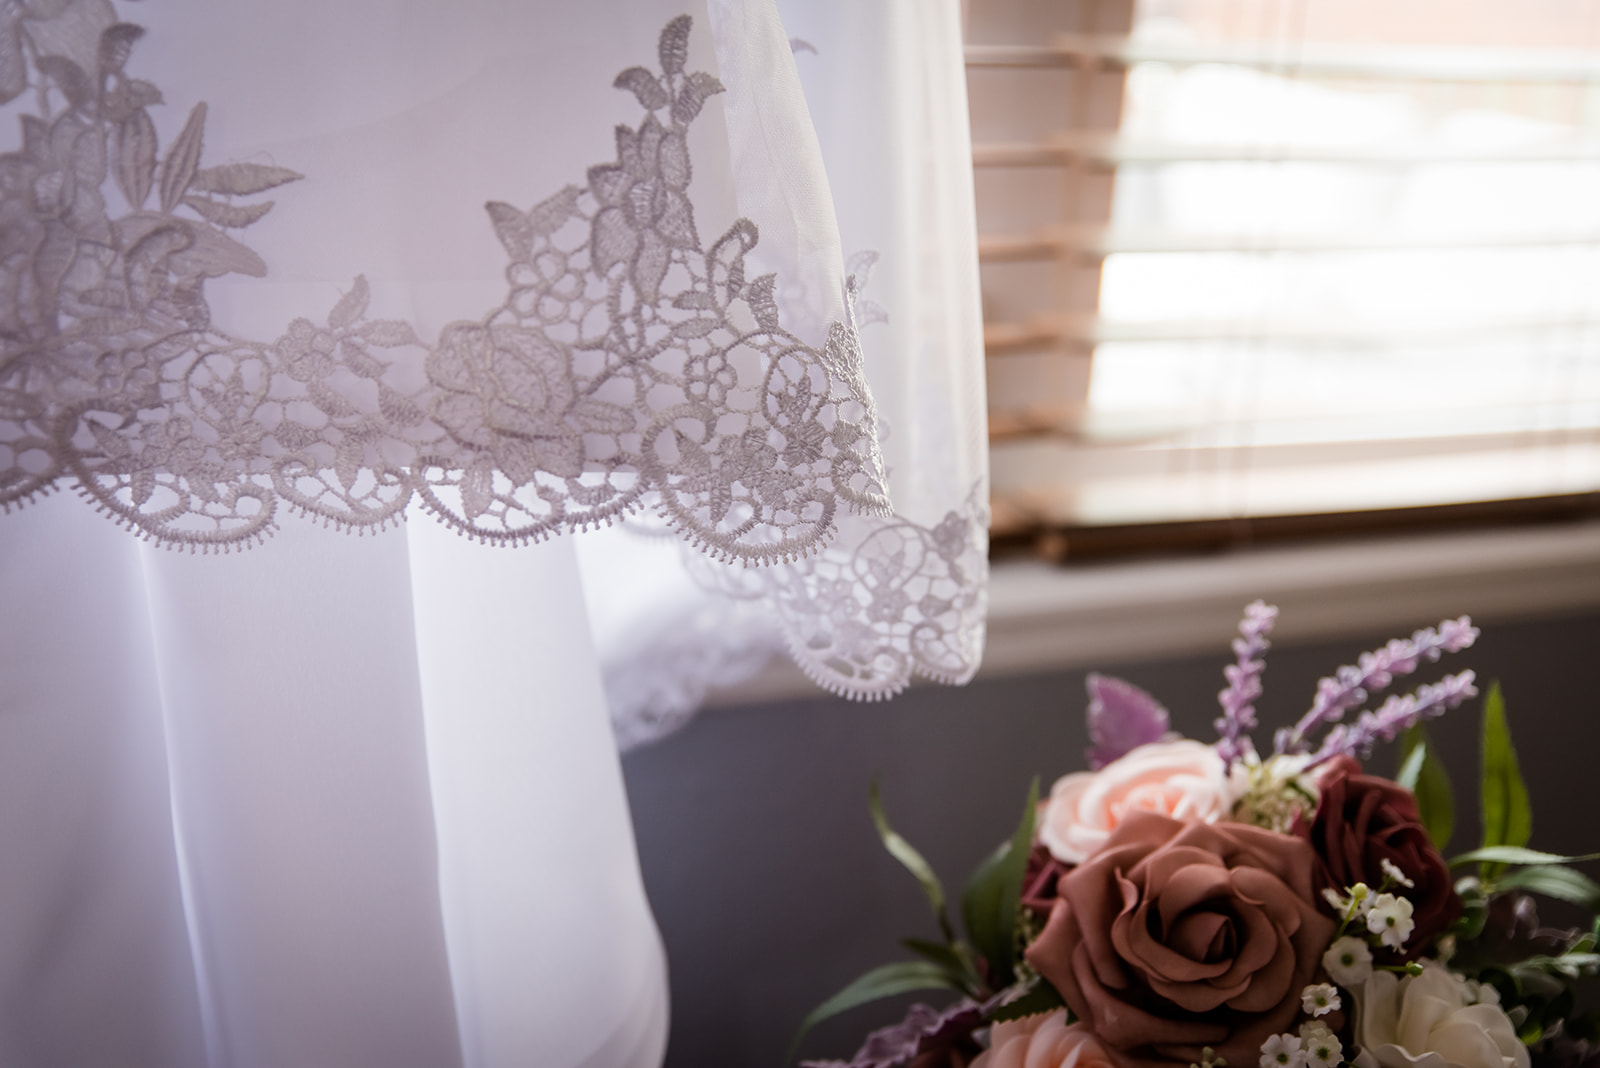 detail of the bride's dress with her flowers